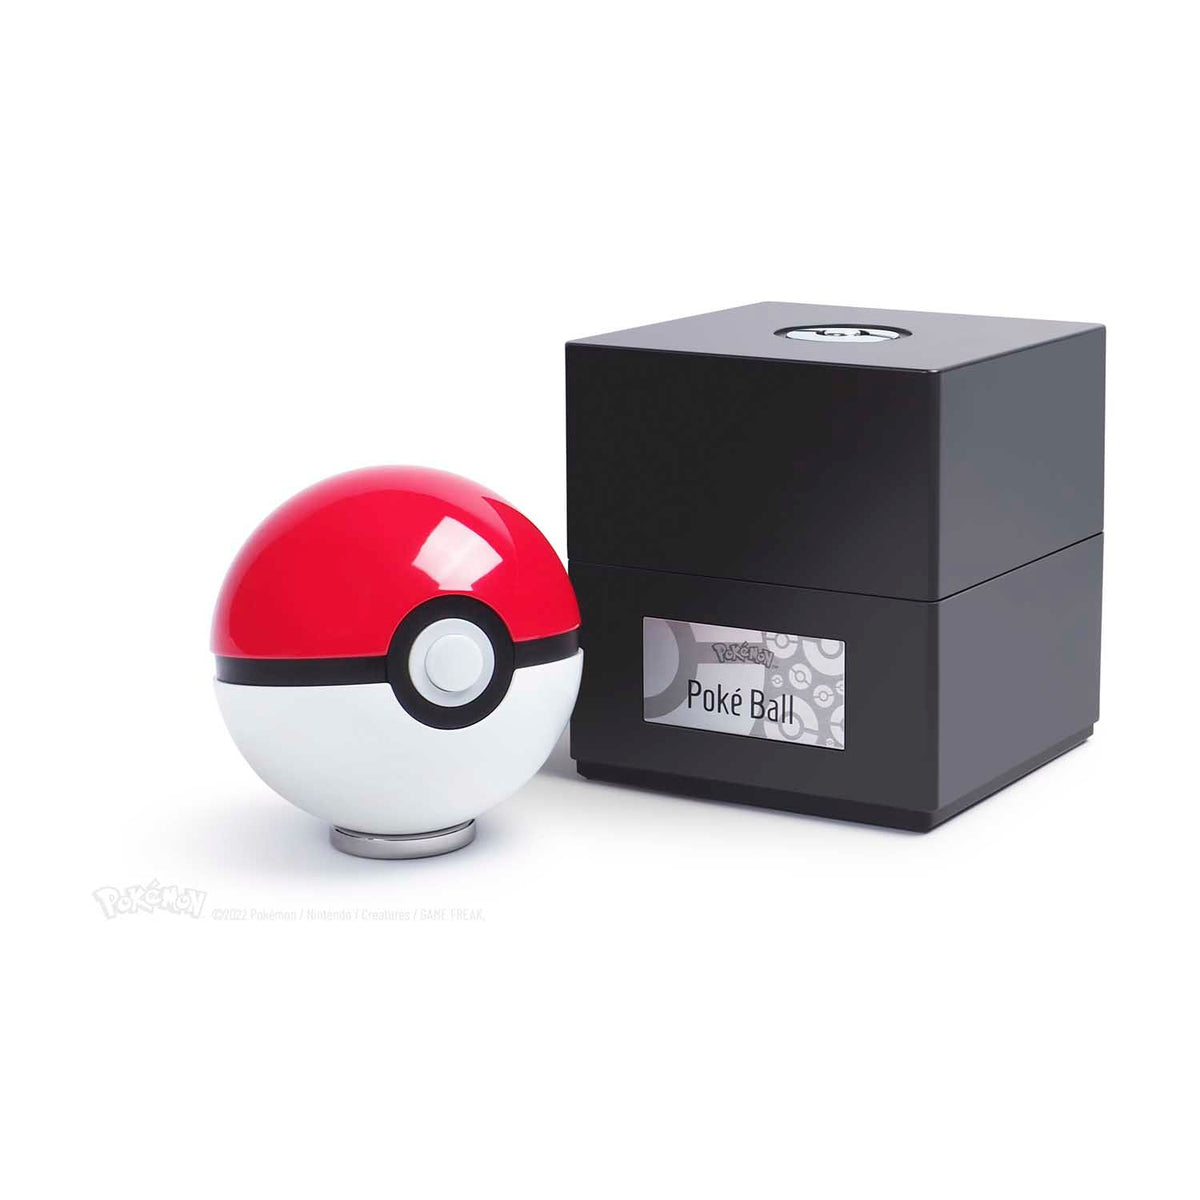 Poké Ball by The Wand Company-Pokemon Centre-Ace Cards &amp; Collectibles